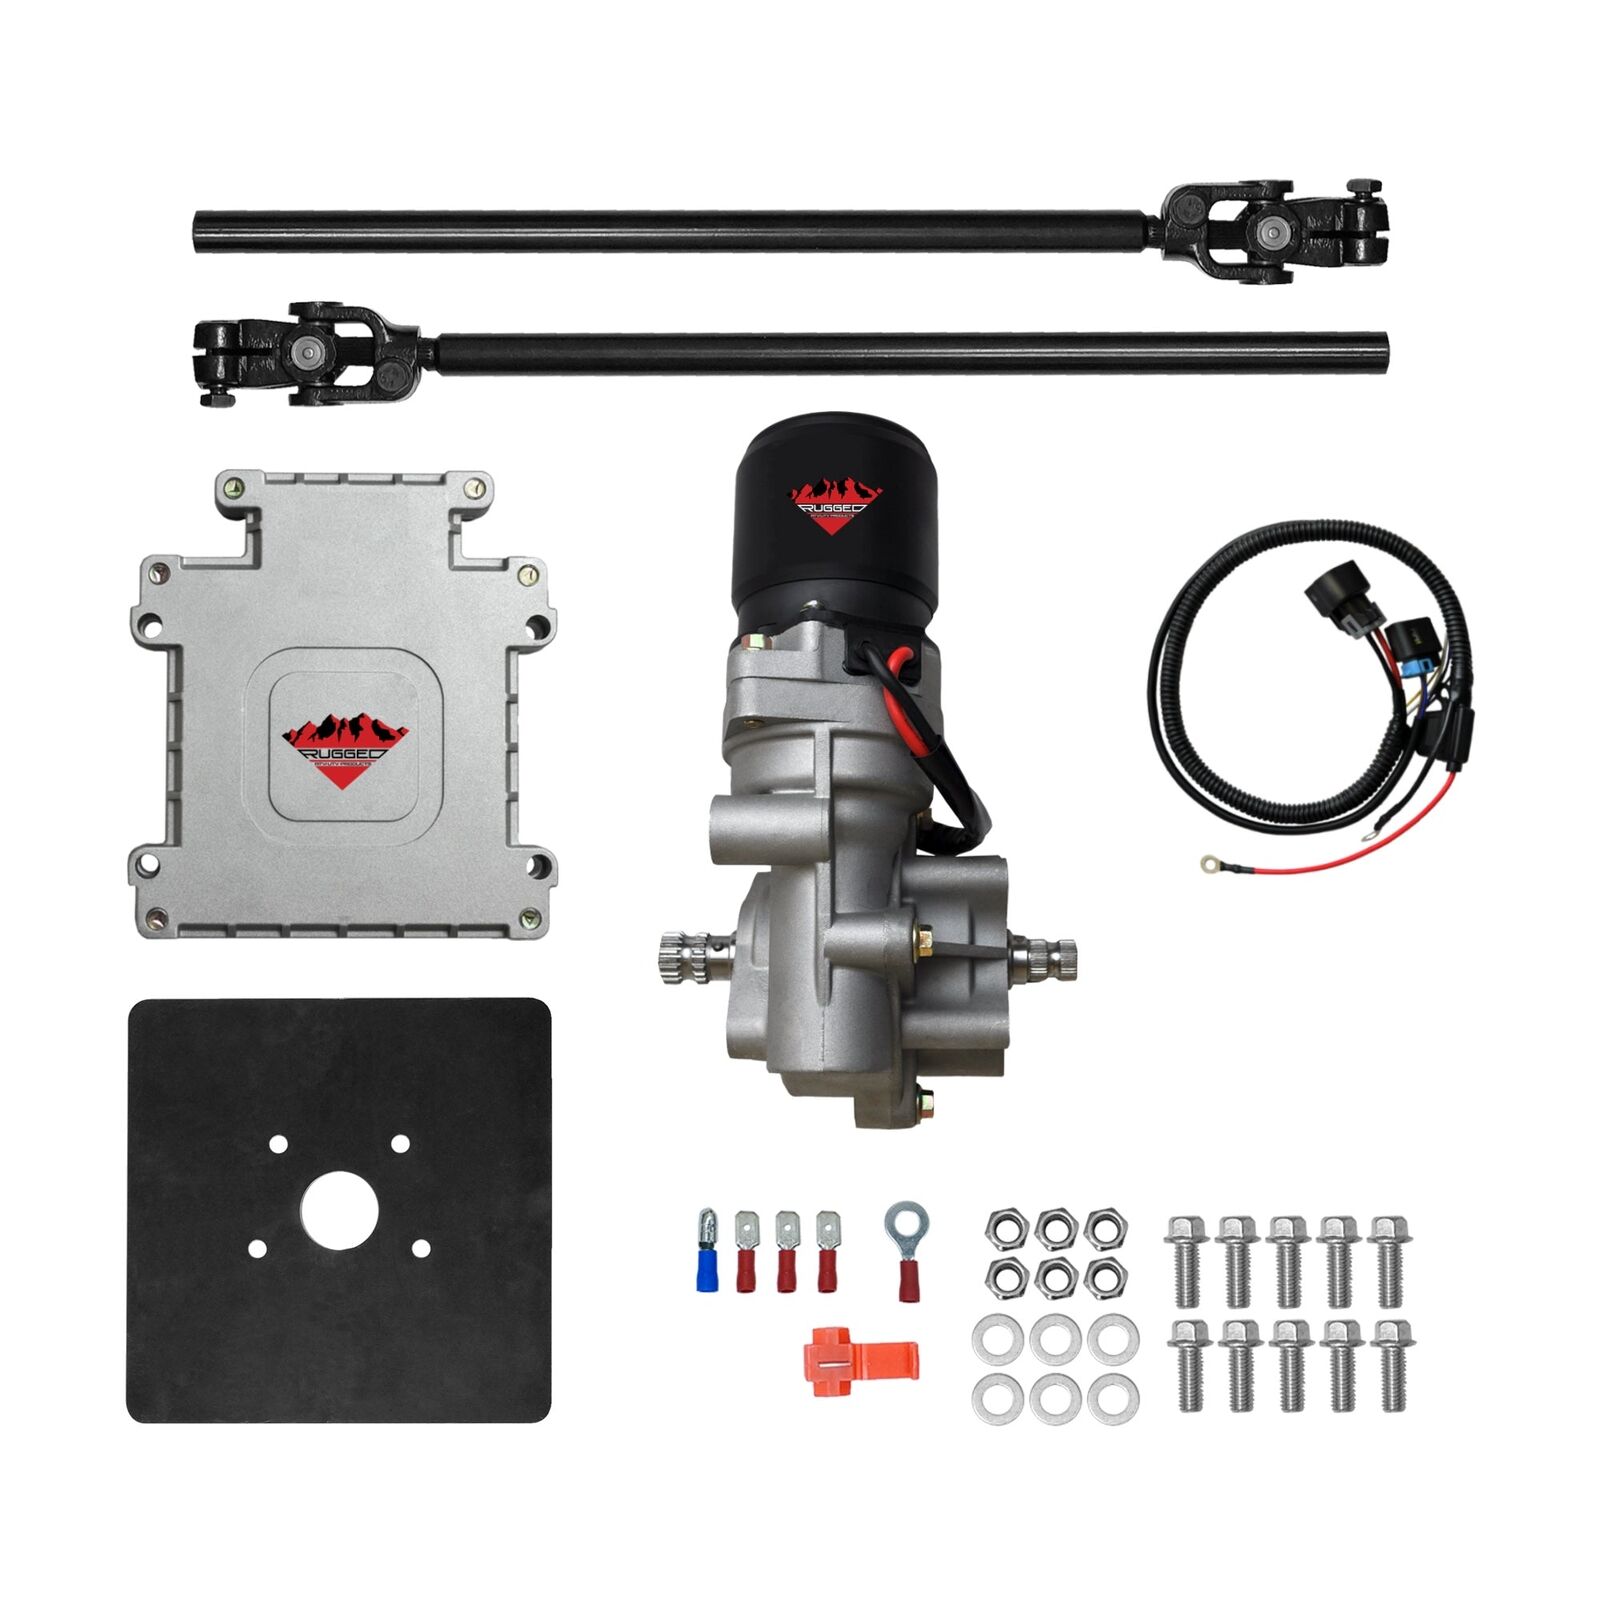 RUGGED Electric Power Steering Kit for Universal Universal  400W Motor Capacity